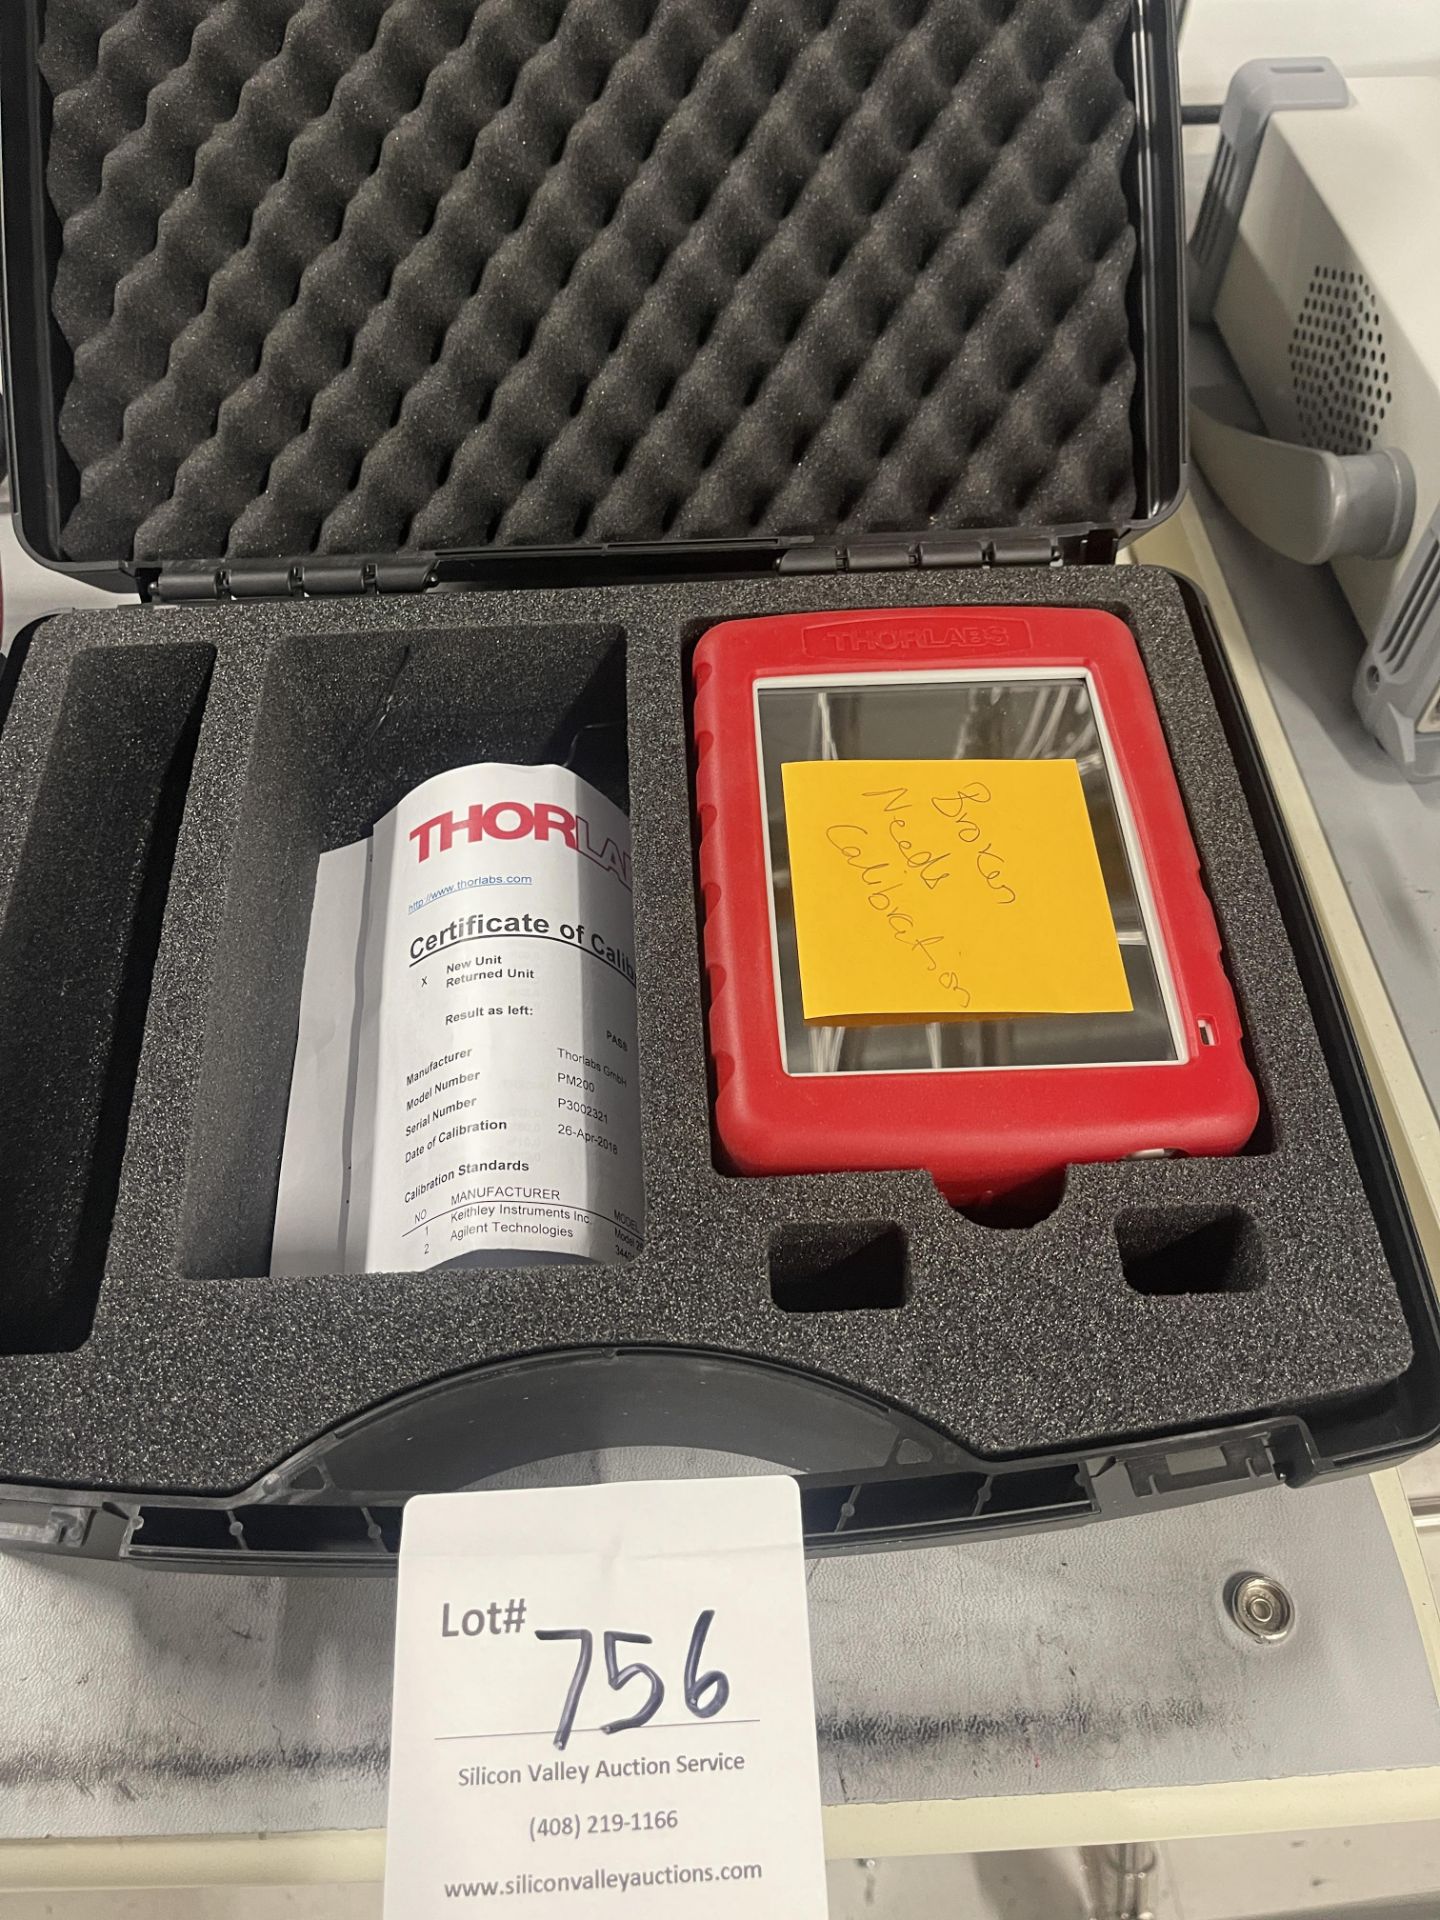 PM200 High Power Optical Power Meter in plastic case - condition unknown